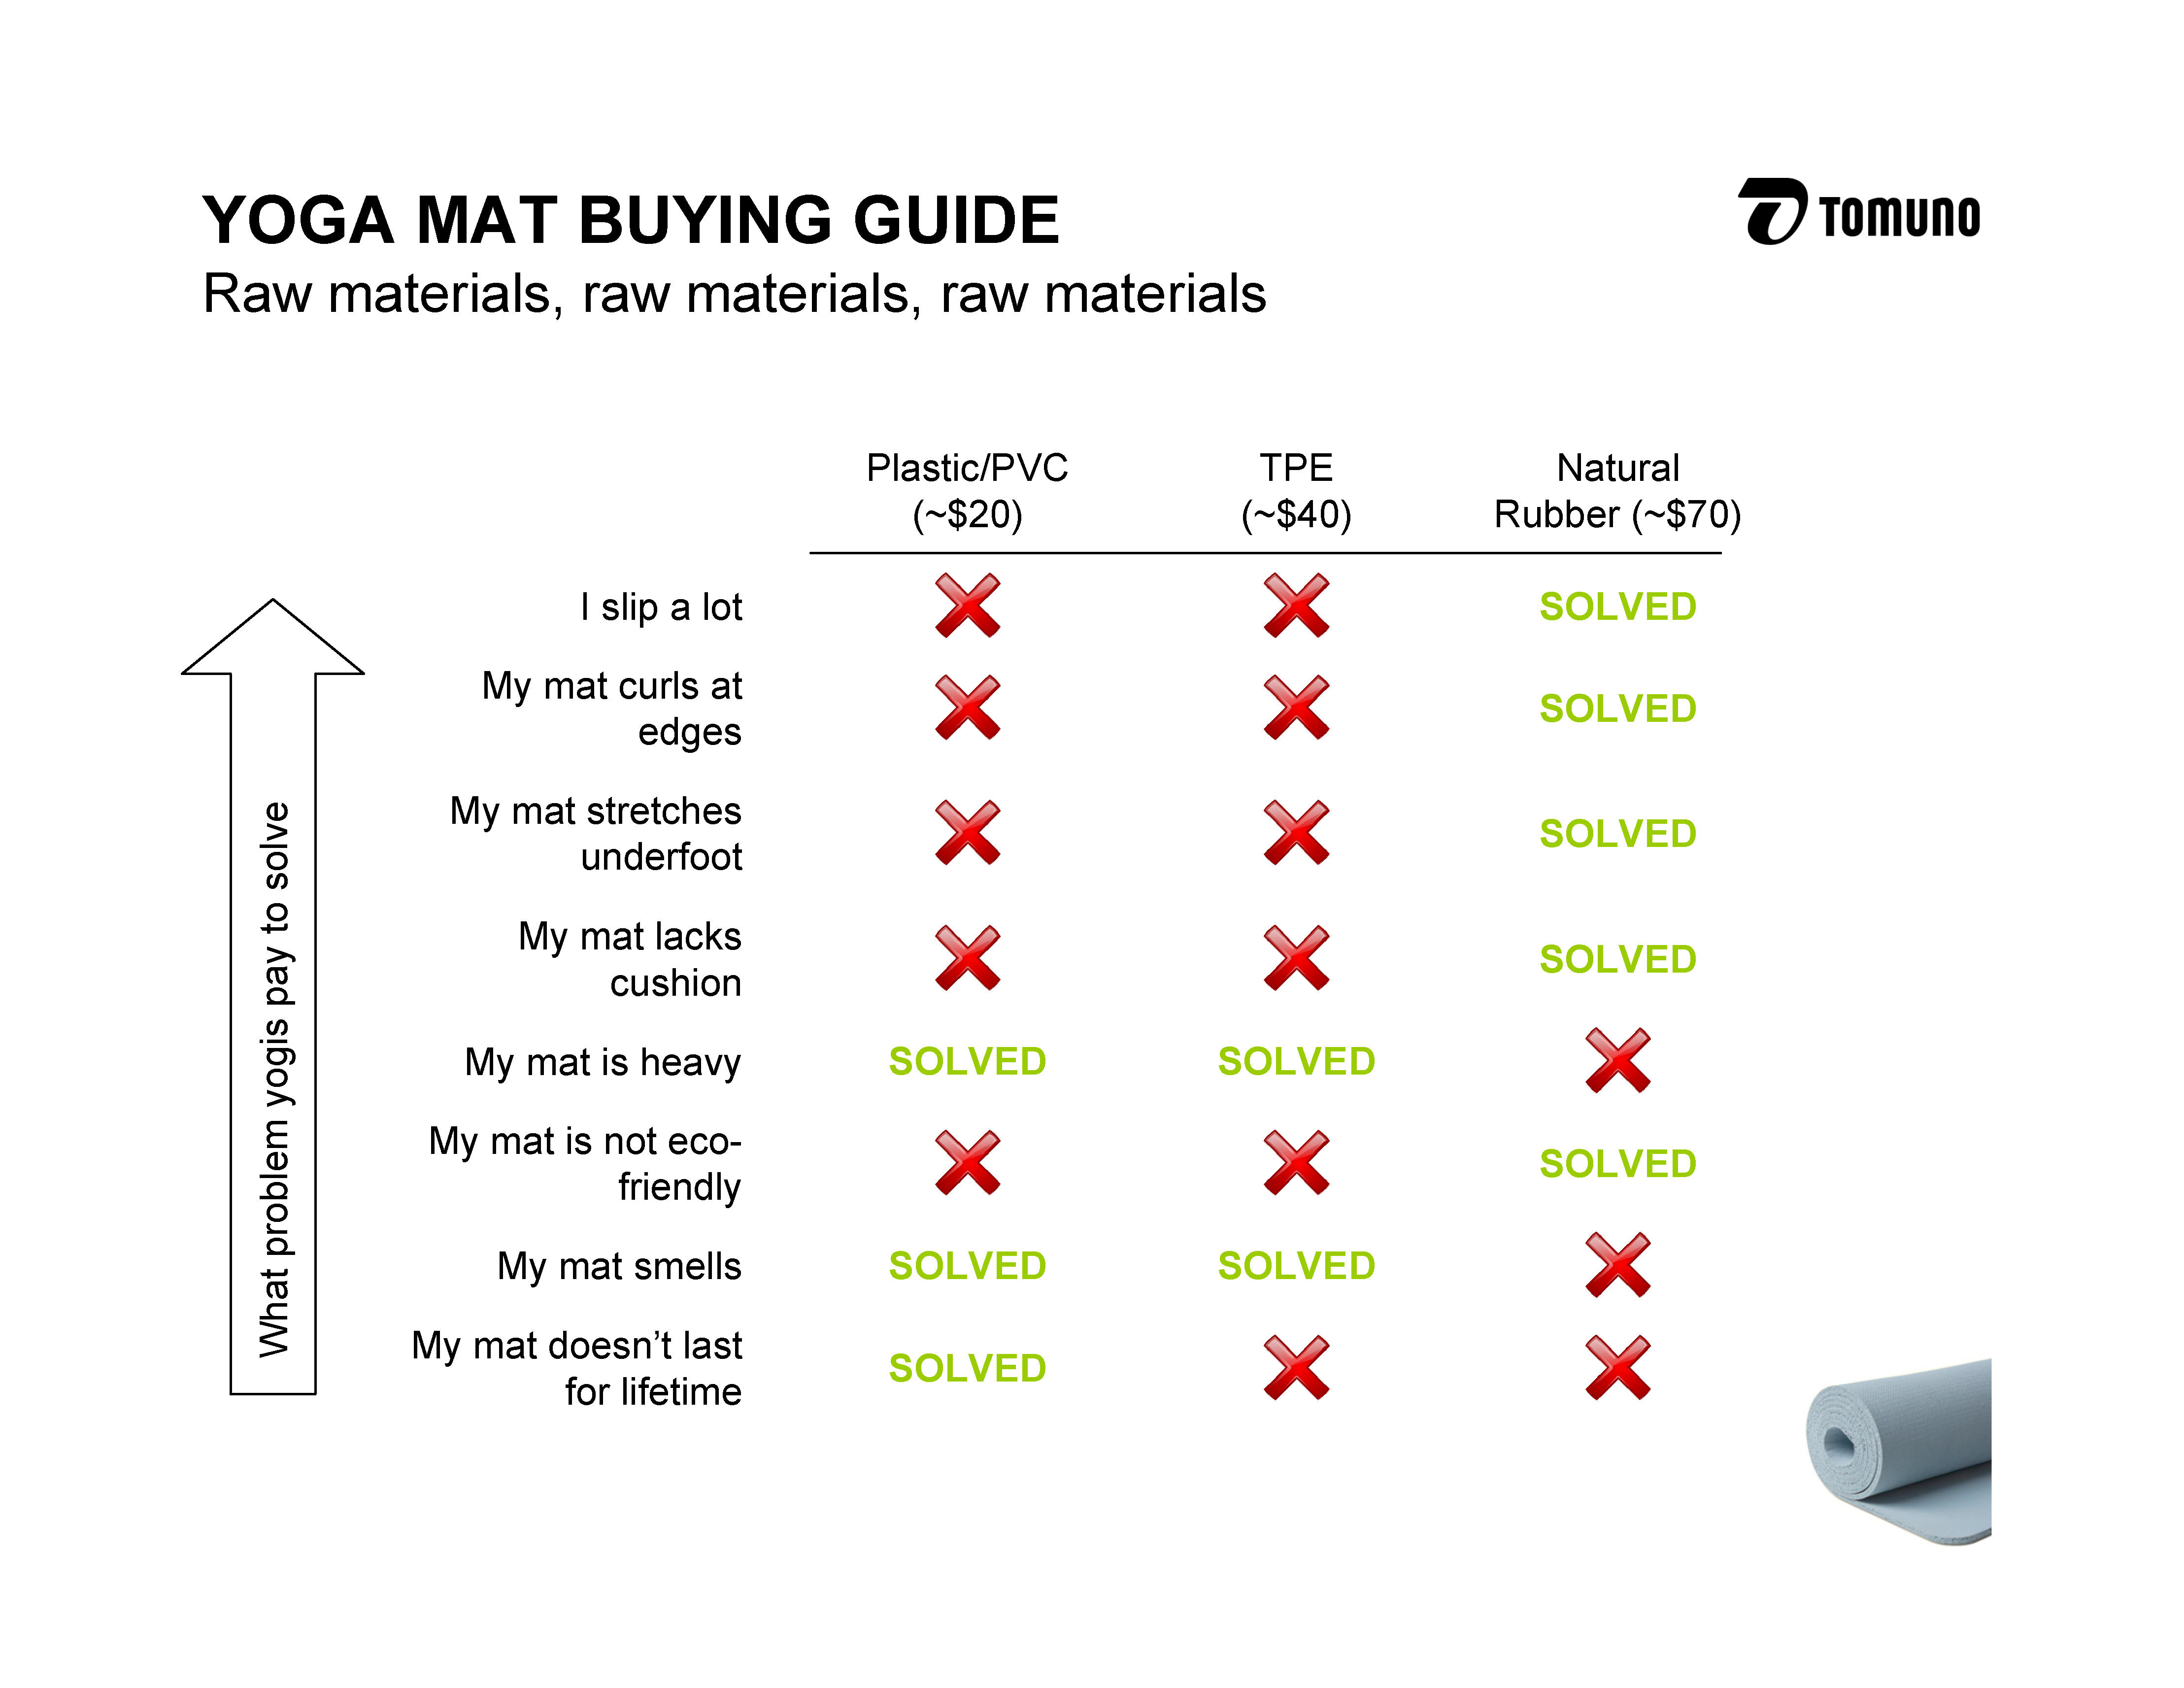 Compare different yoga mat materials - Which one is the best for you?